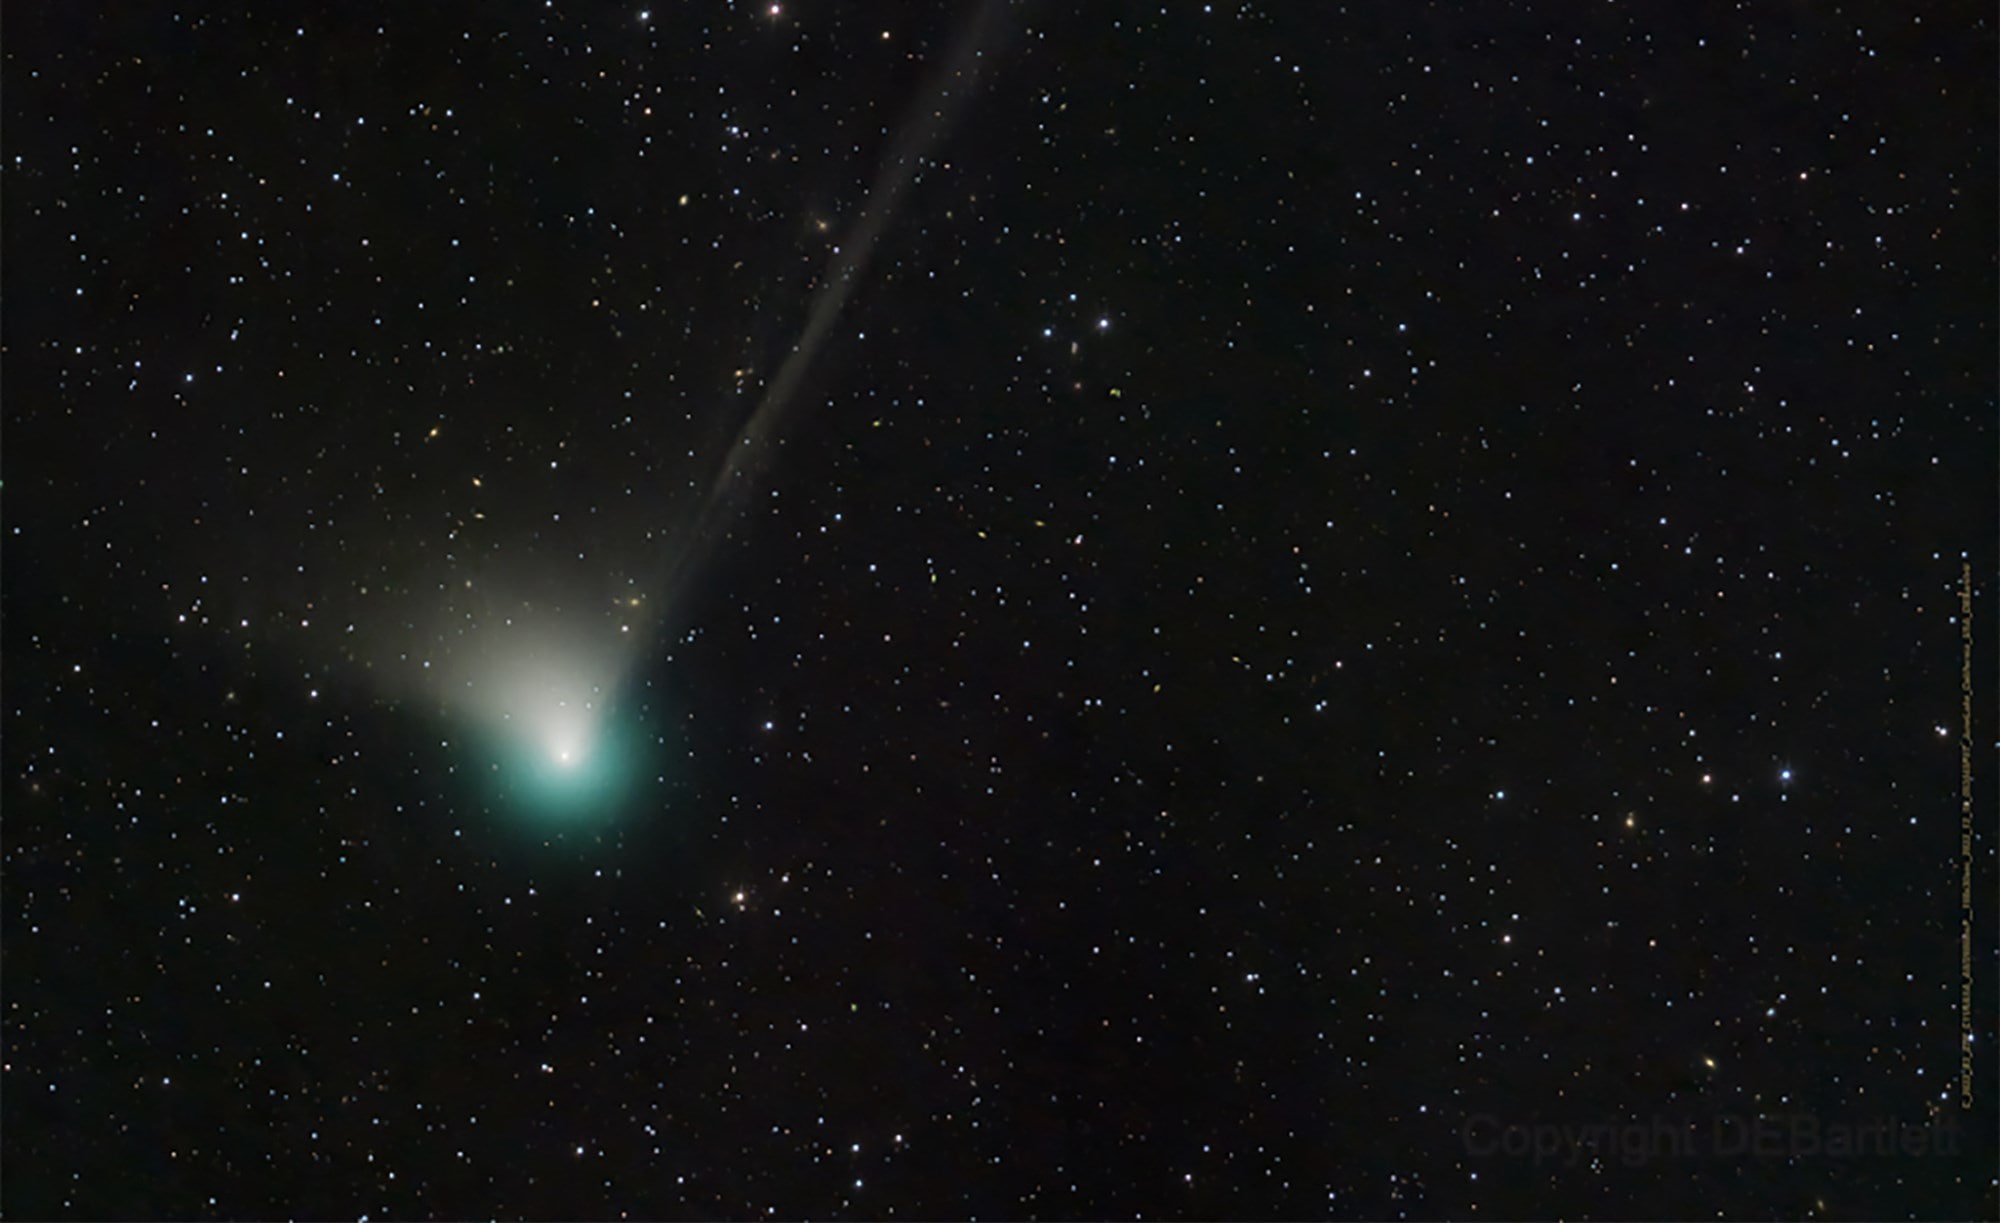 On this date there is a green comet over Enschede